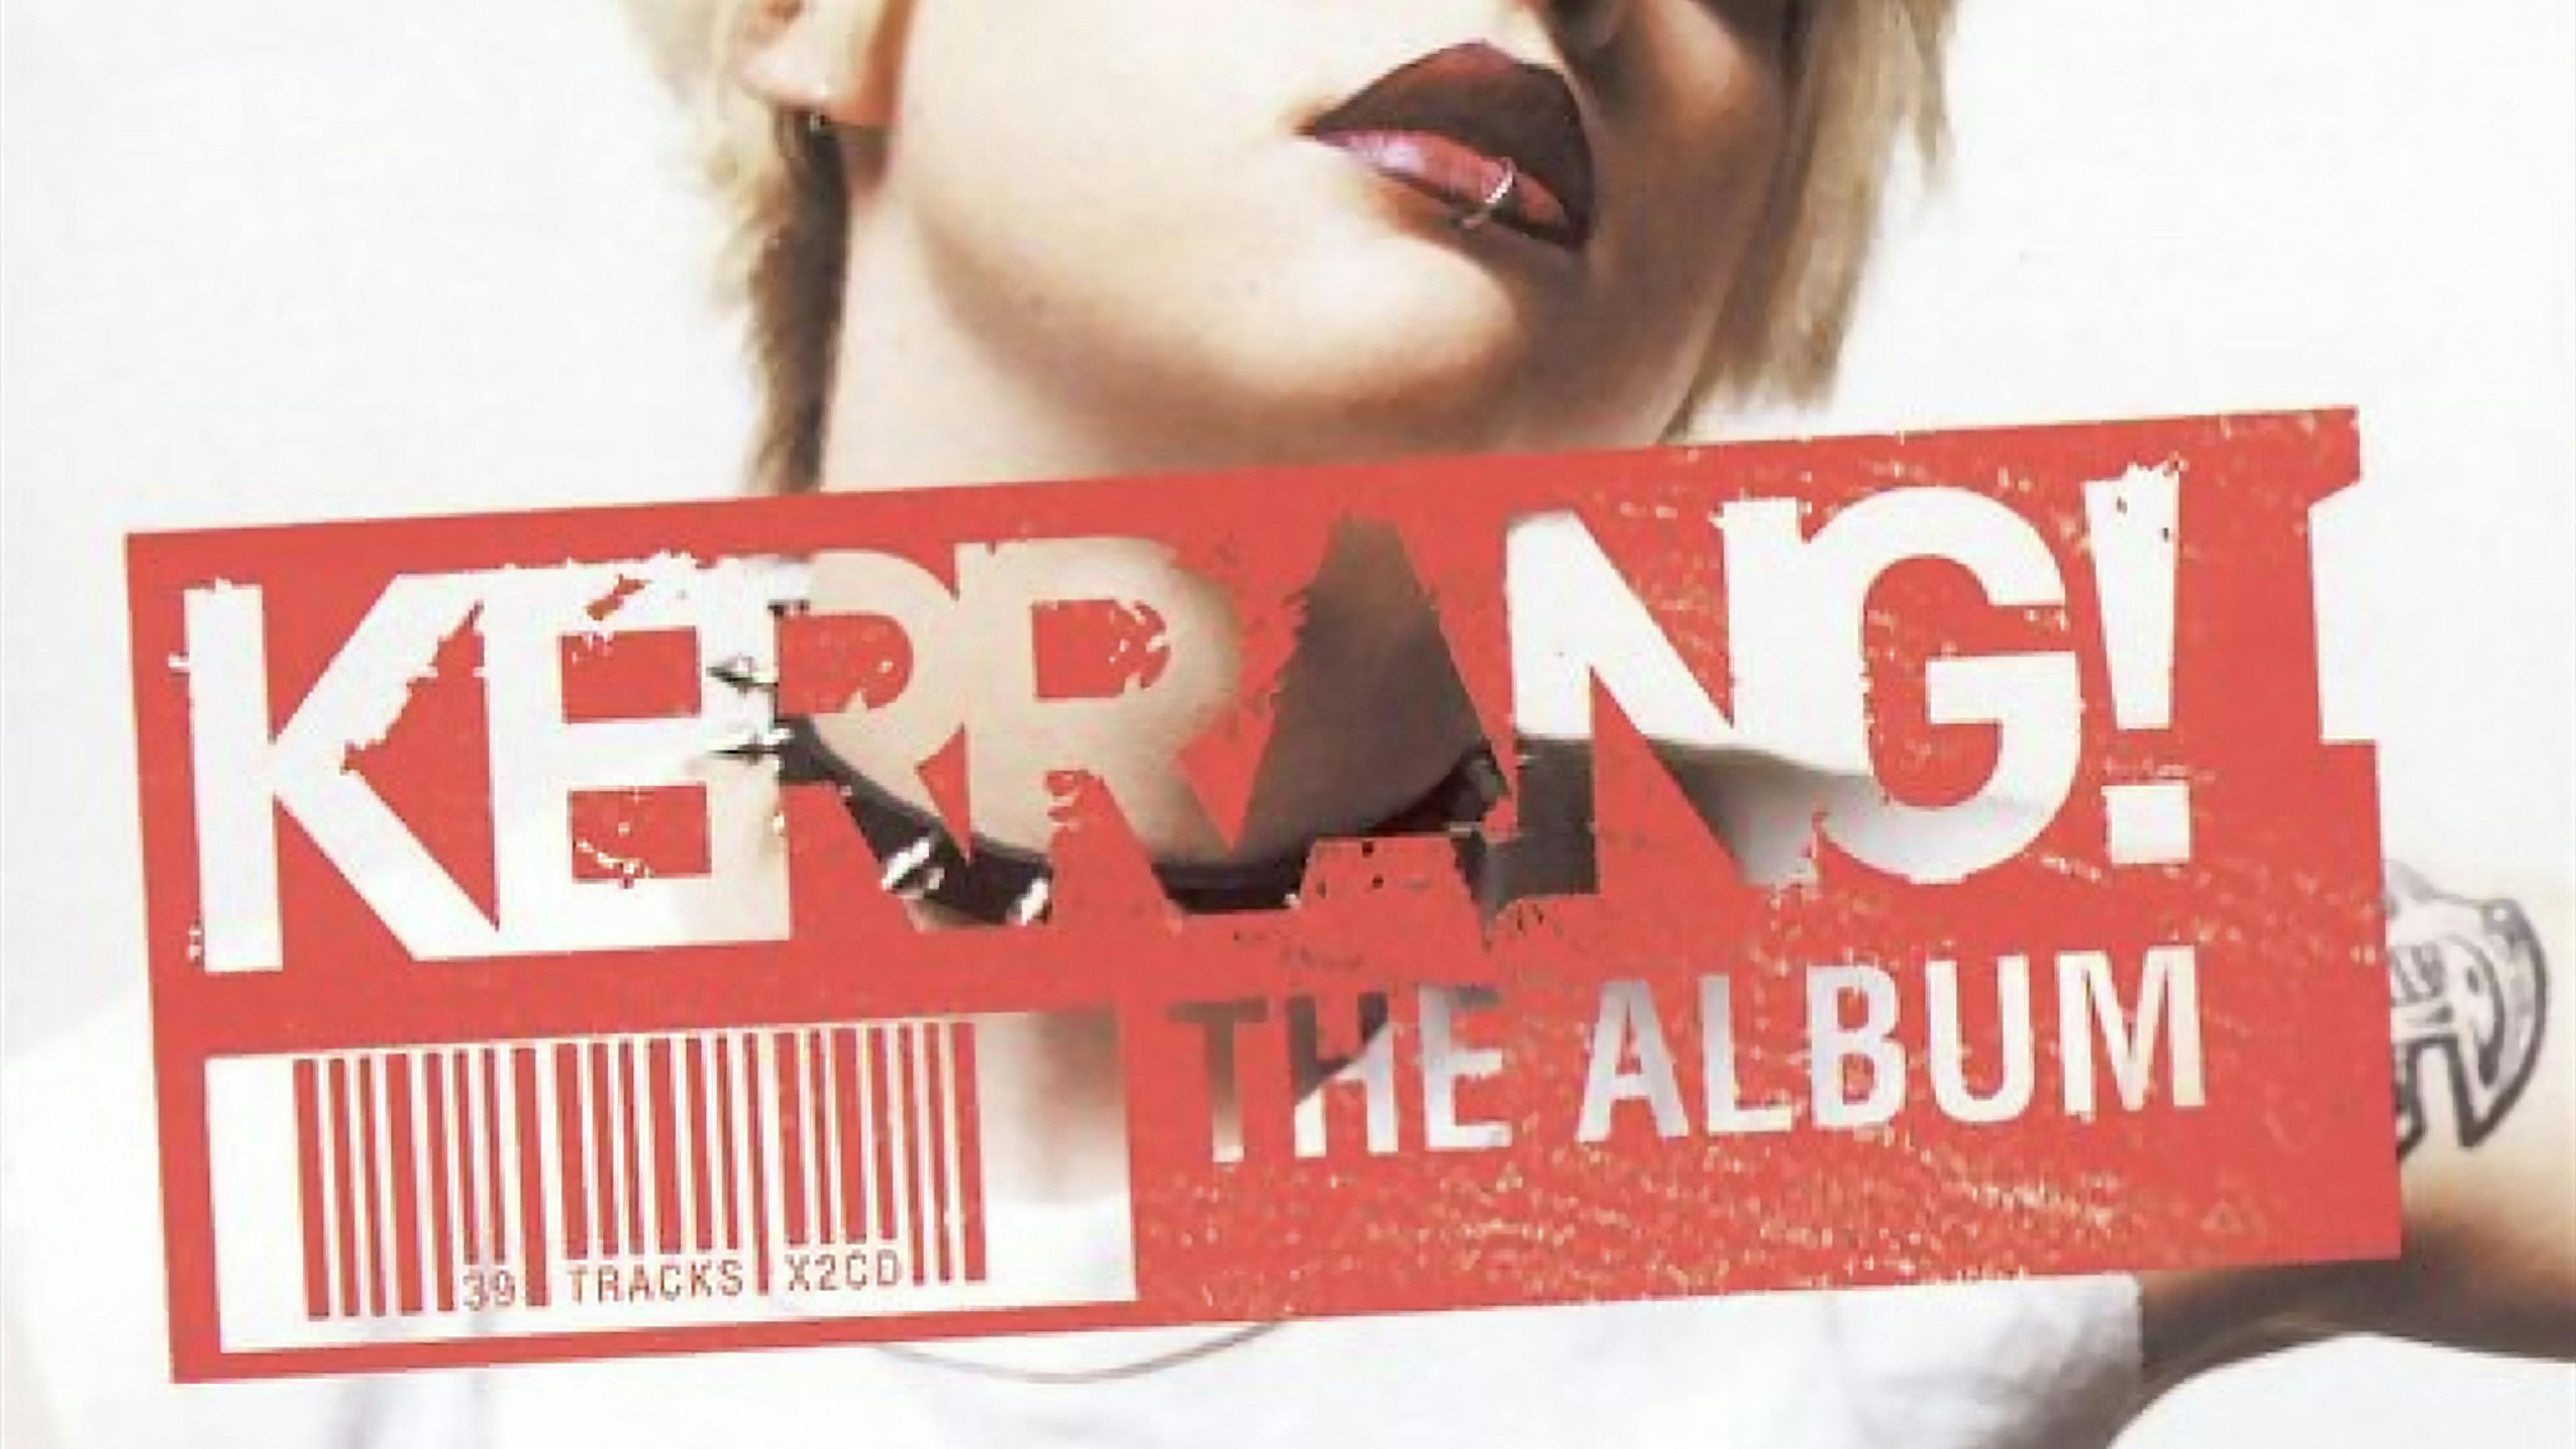 The alumni of Kerrang! The Album: Where are they now?